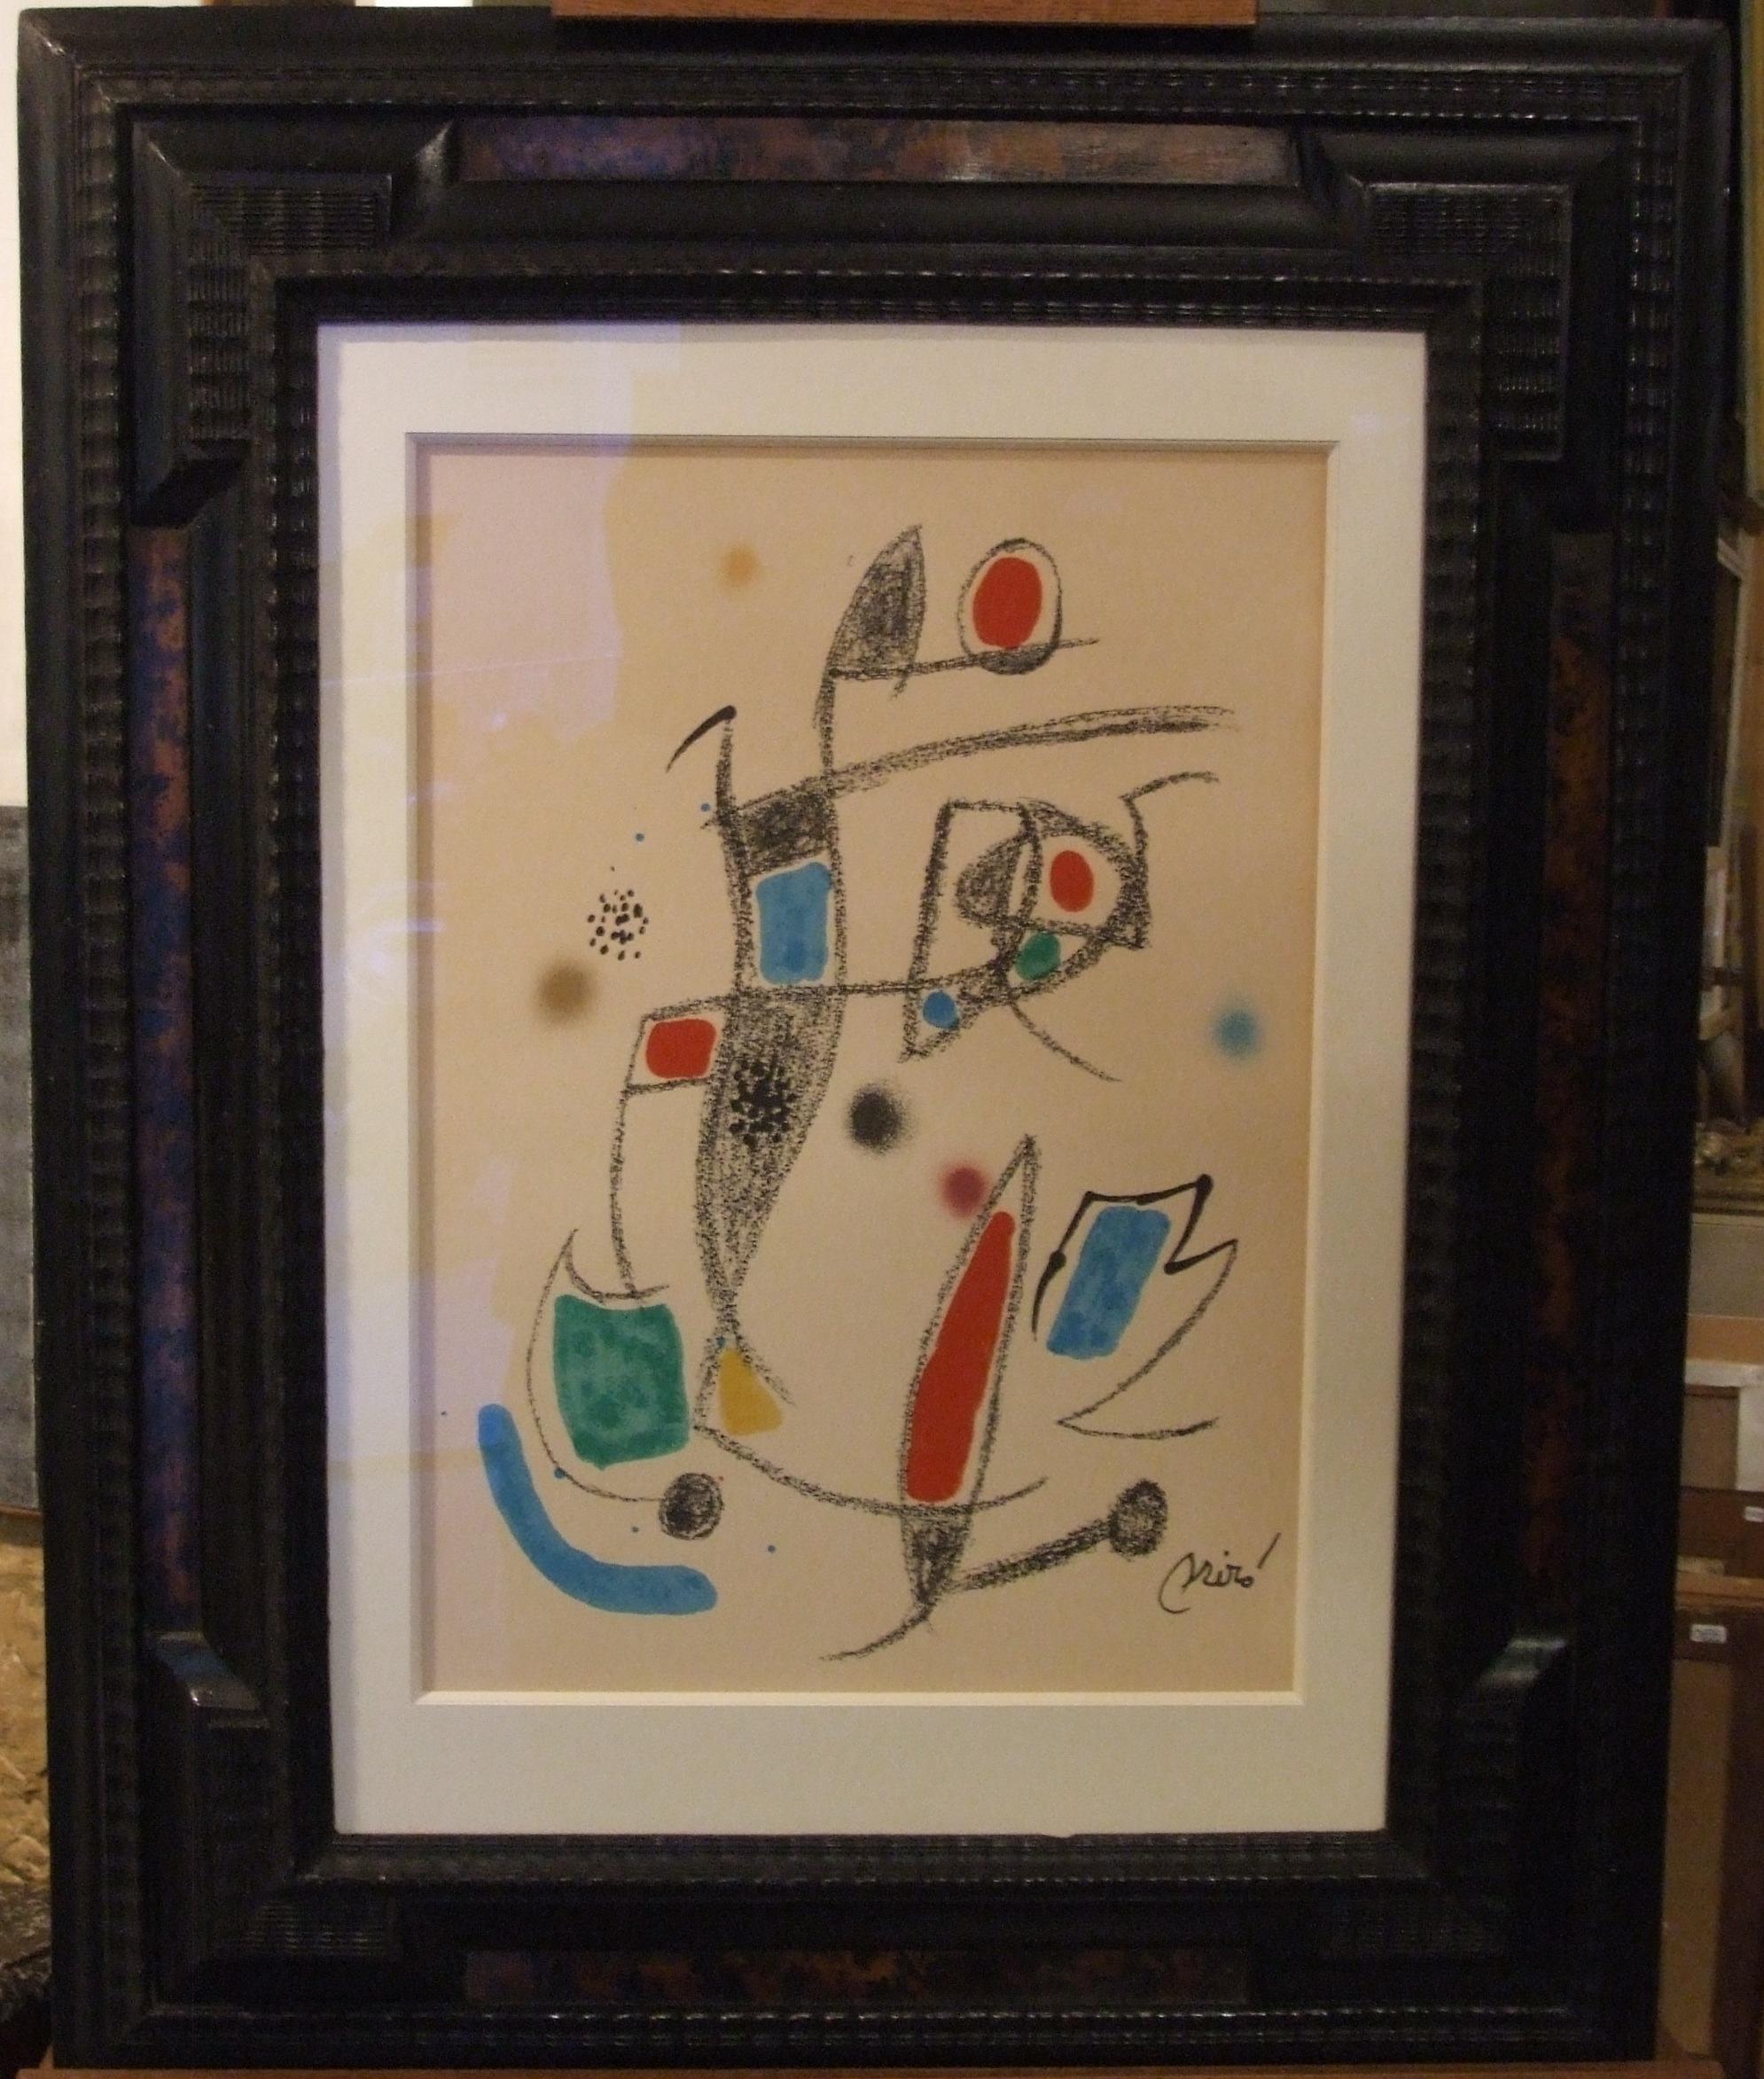 Joan Miró Abstract Print - no title '60s - litograph, 50x35 cm., framed.